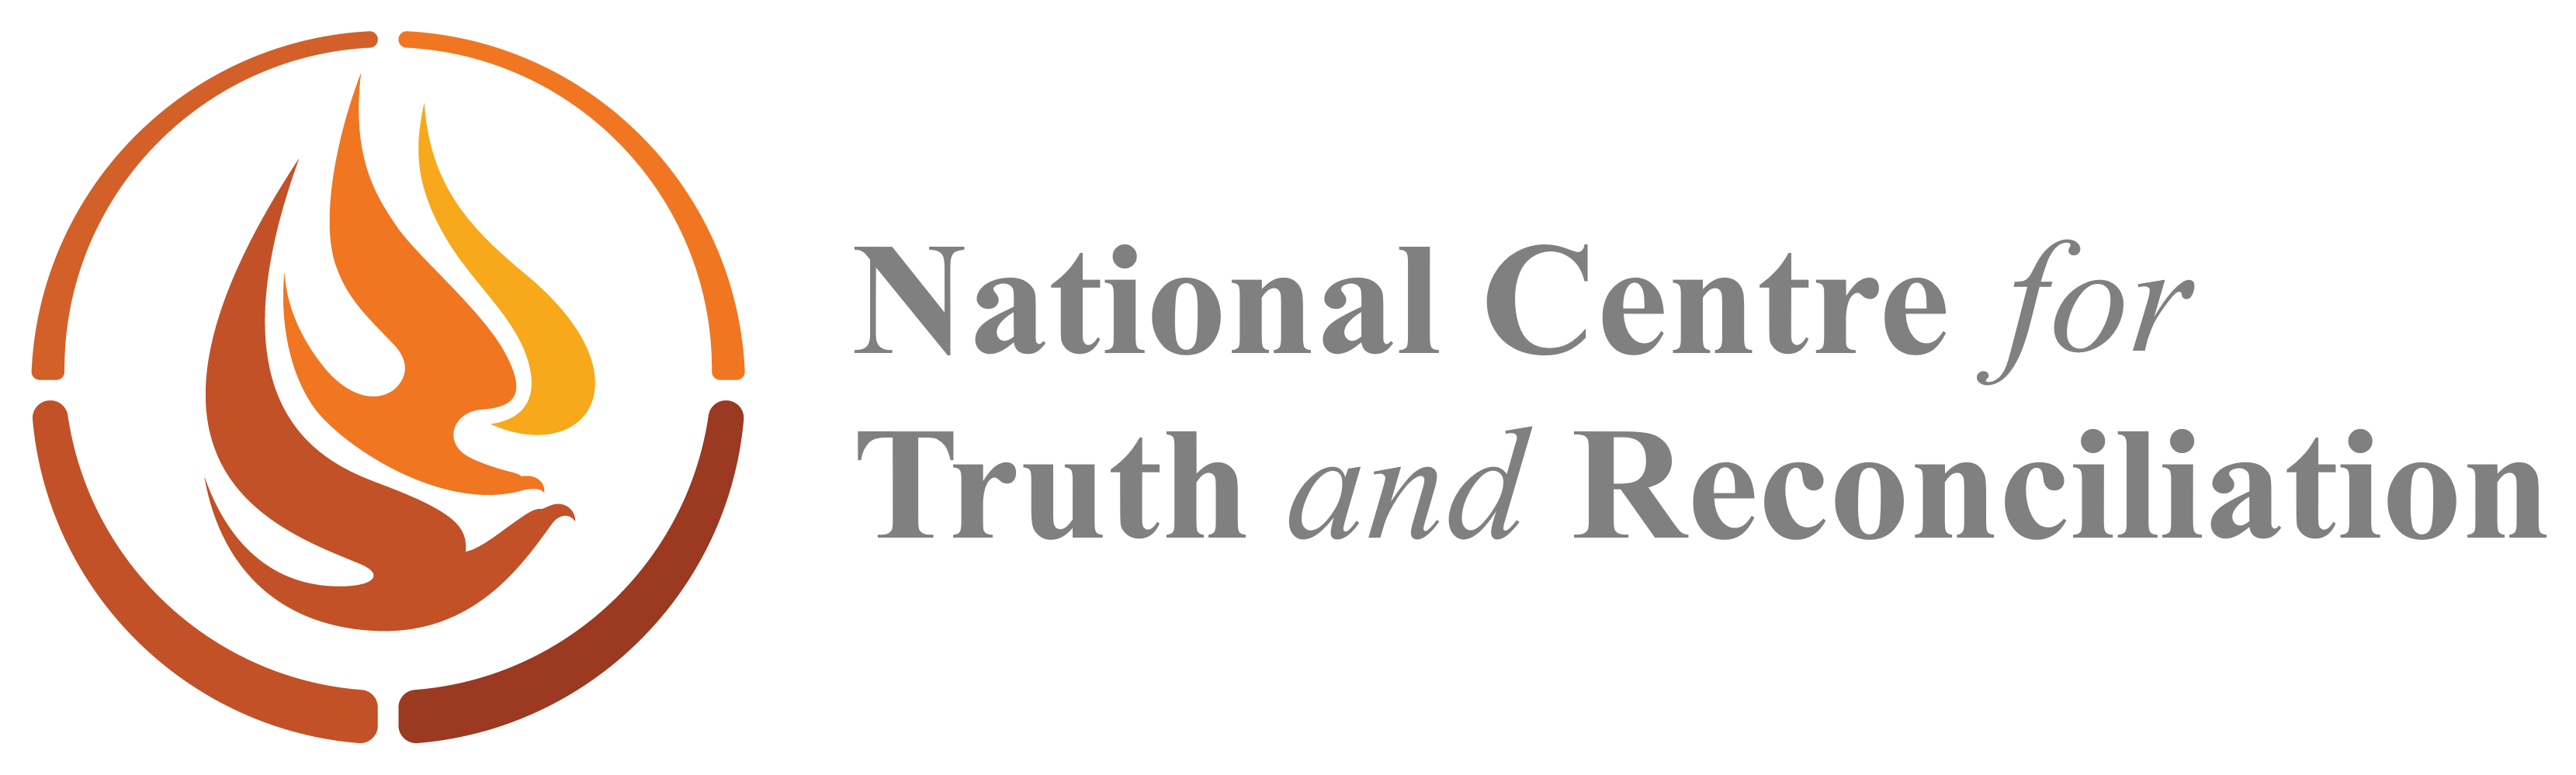 National Centre for Truth and Reconciliation Logo